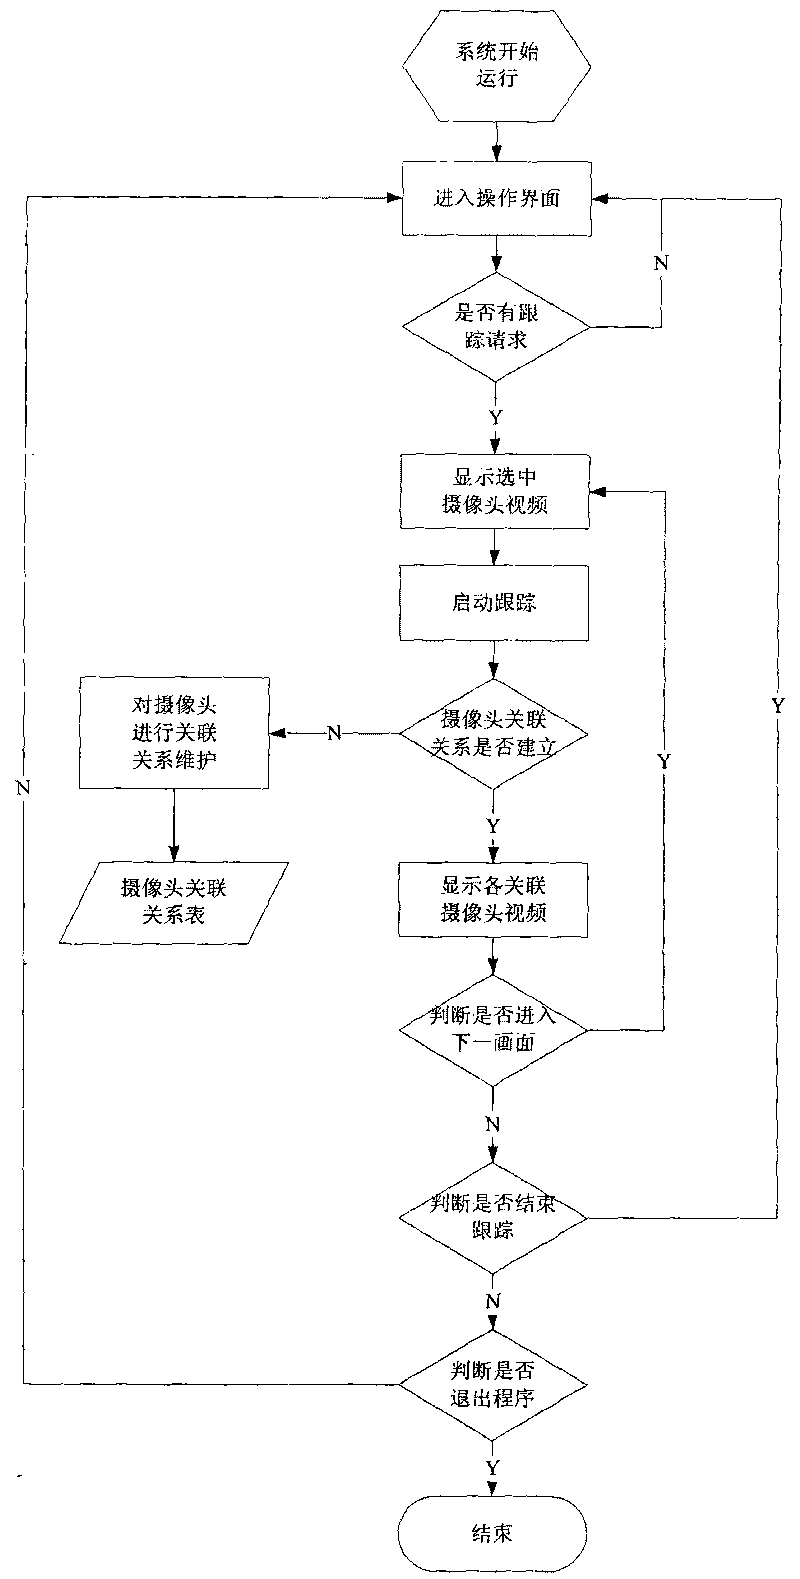 Method and system for realizing video intelligent track navigation